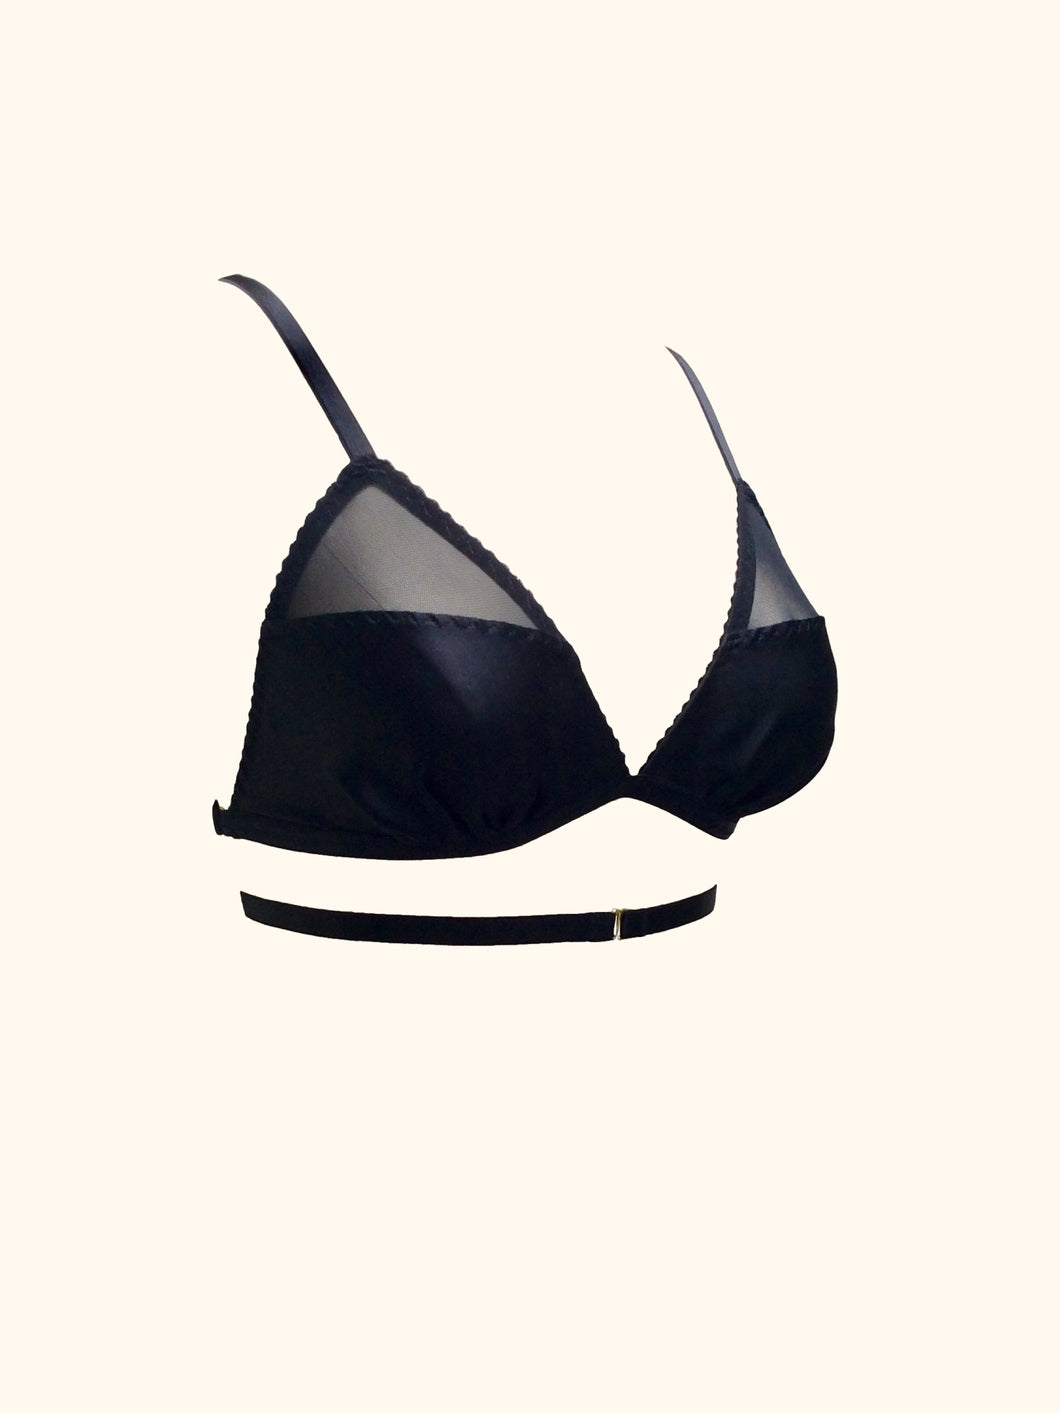 Side front view of the Nina wrap around bralette. The cups are gathered silk at the base with an angled seam that leads to a triangular black mesh panel at the top of the cup. The mesh is around 1 third of the total cup.